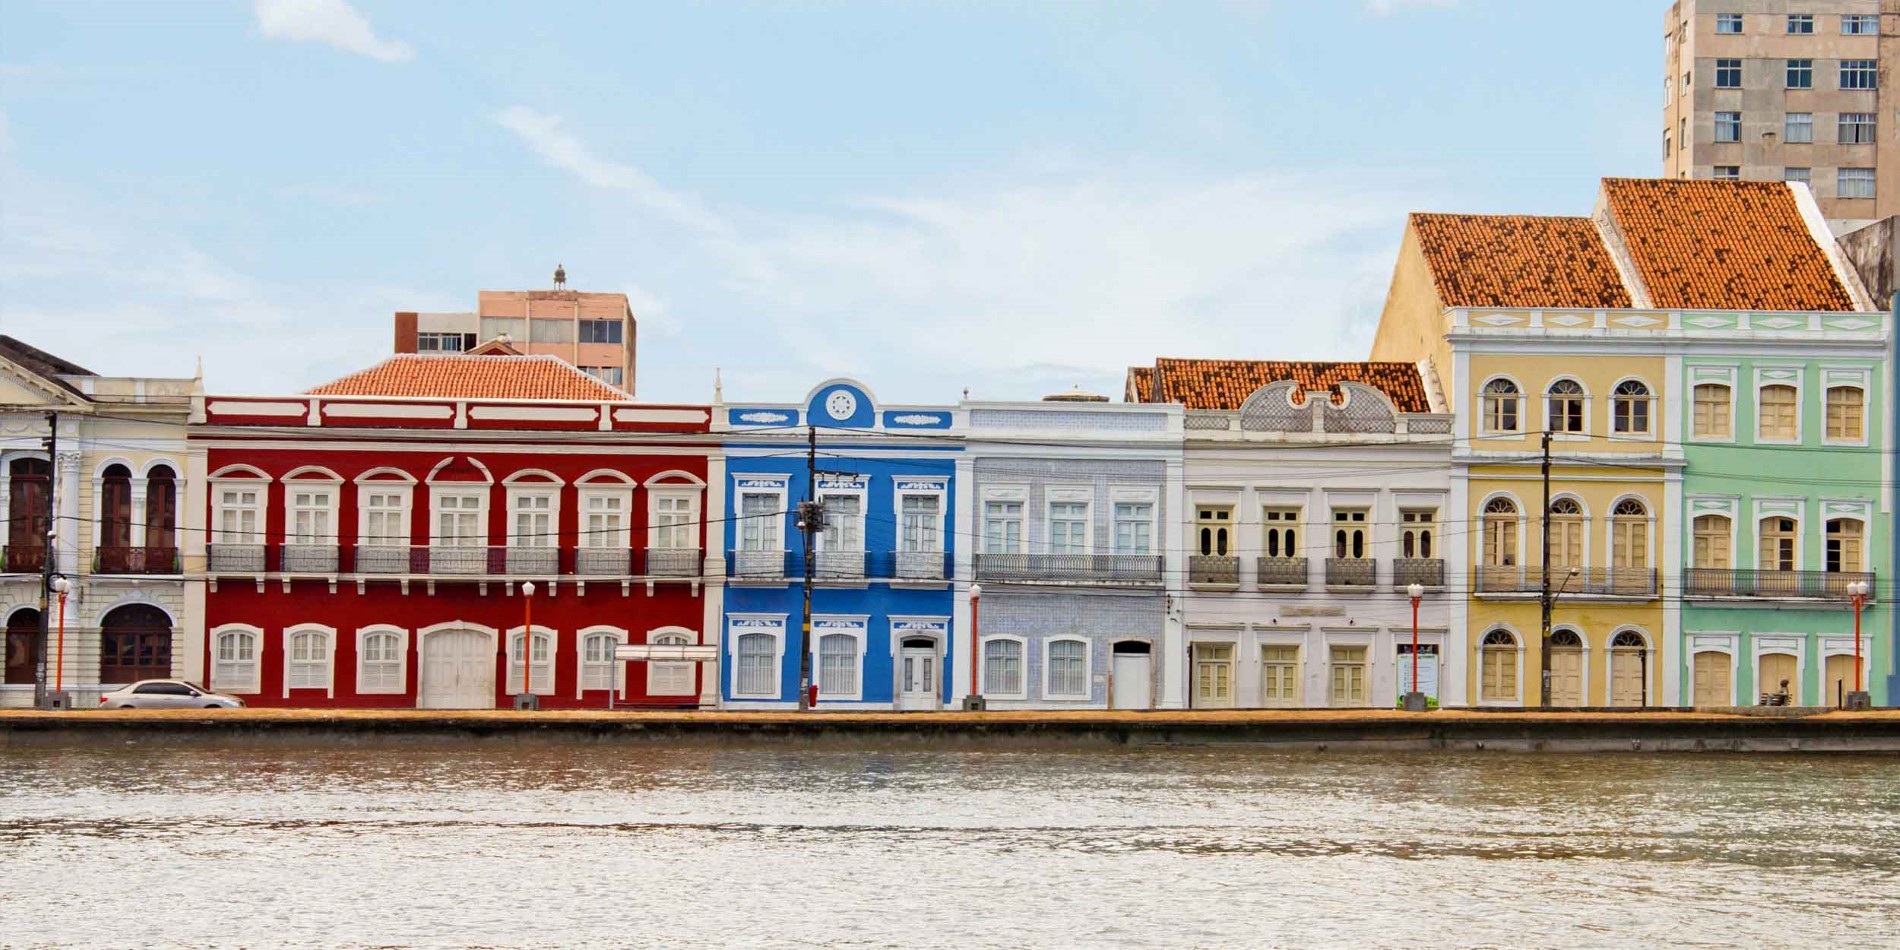 Buildings in the historical centre of Recife, Brazil.